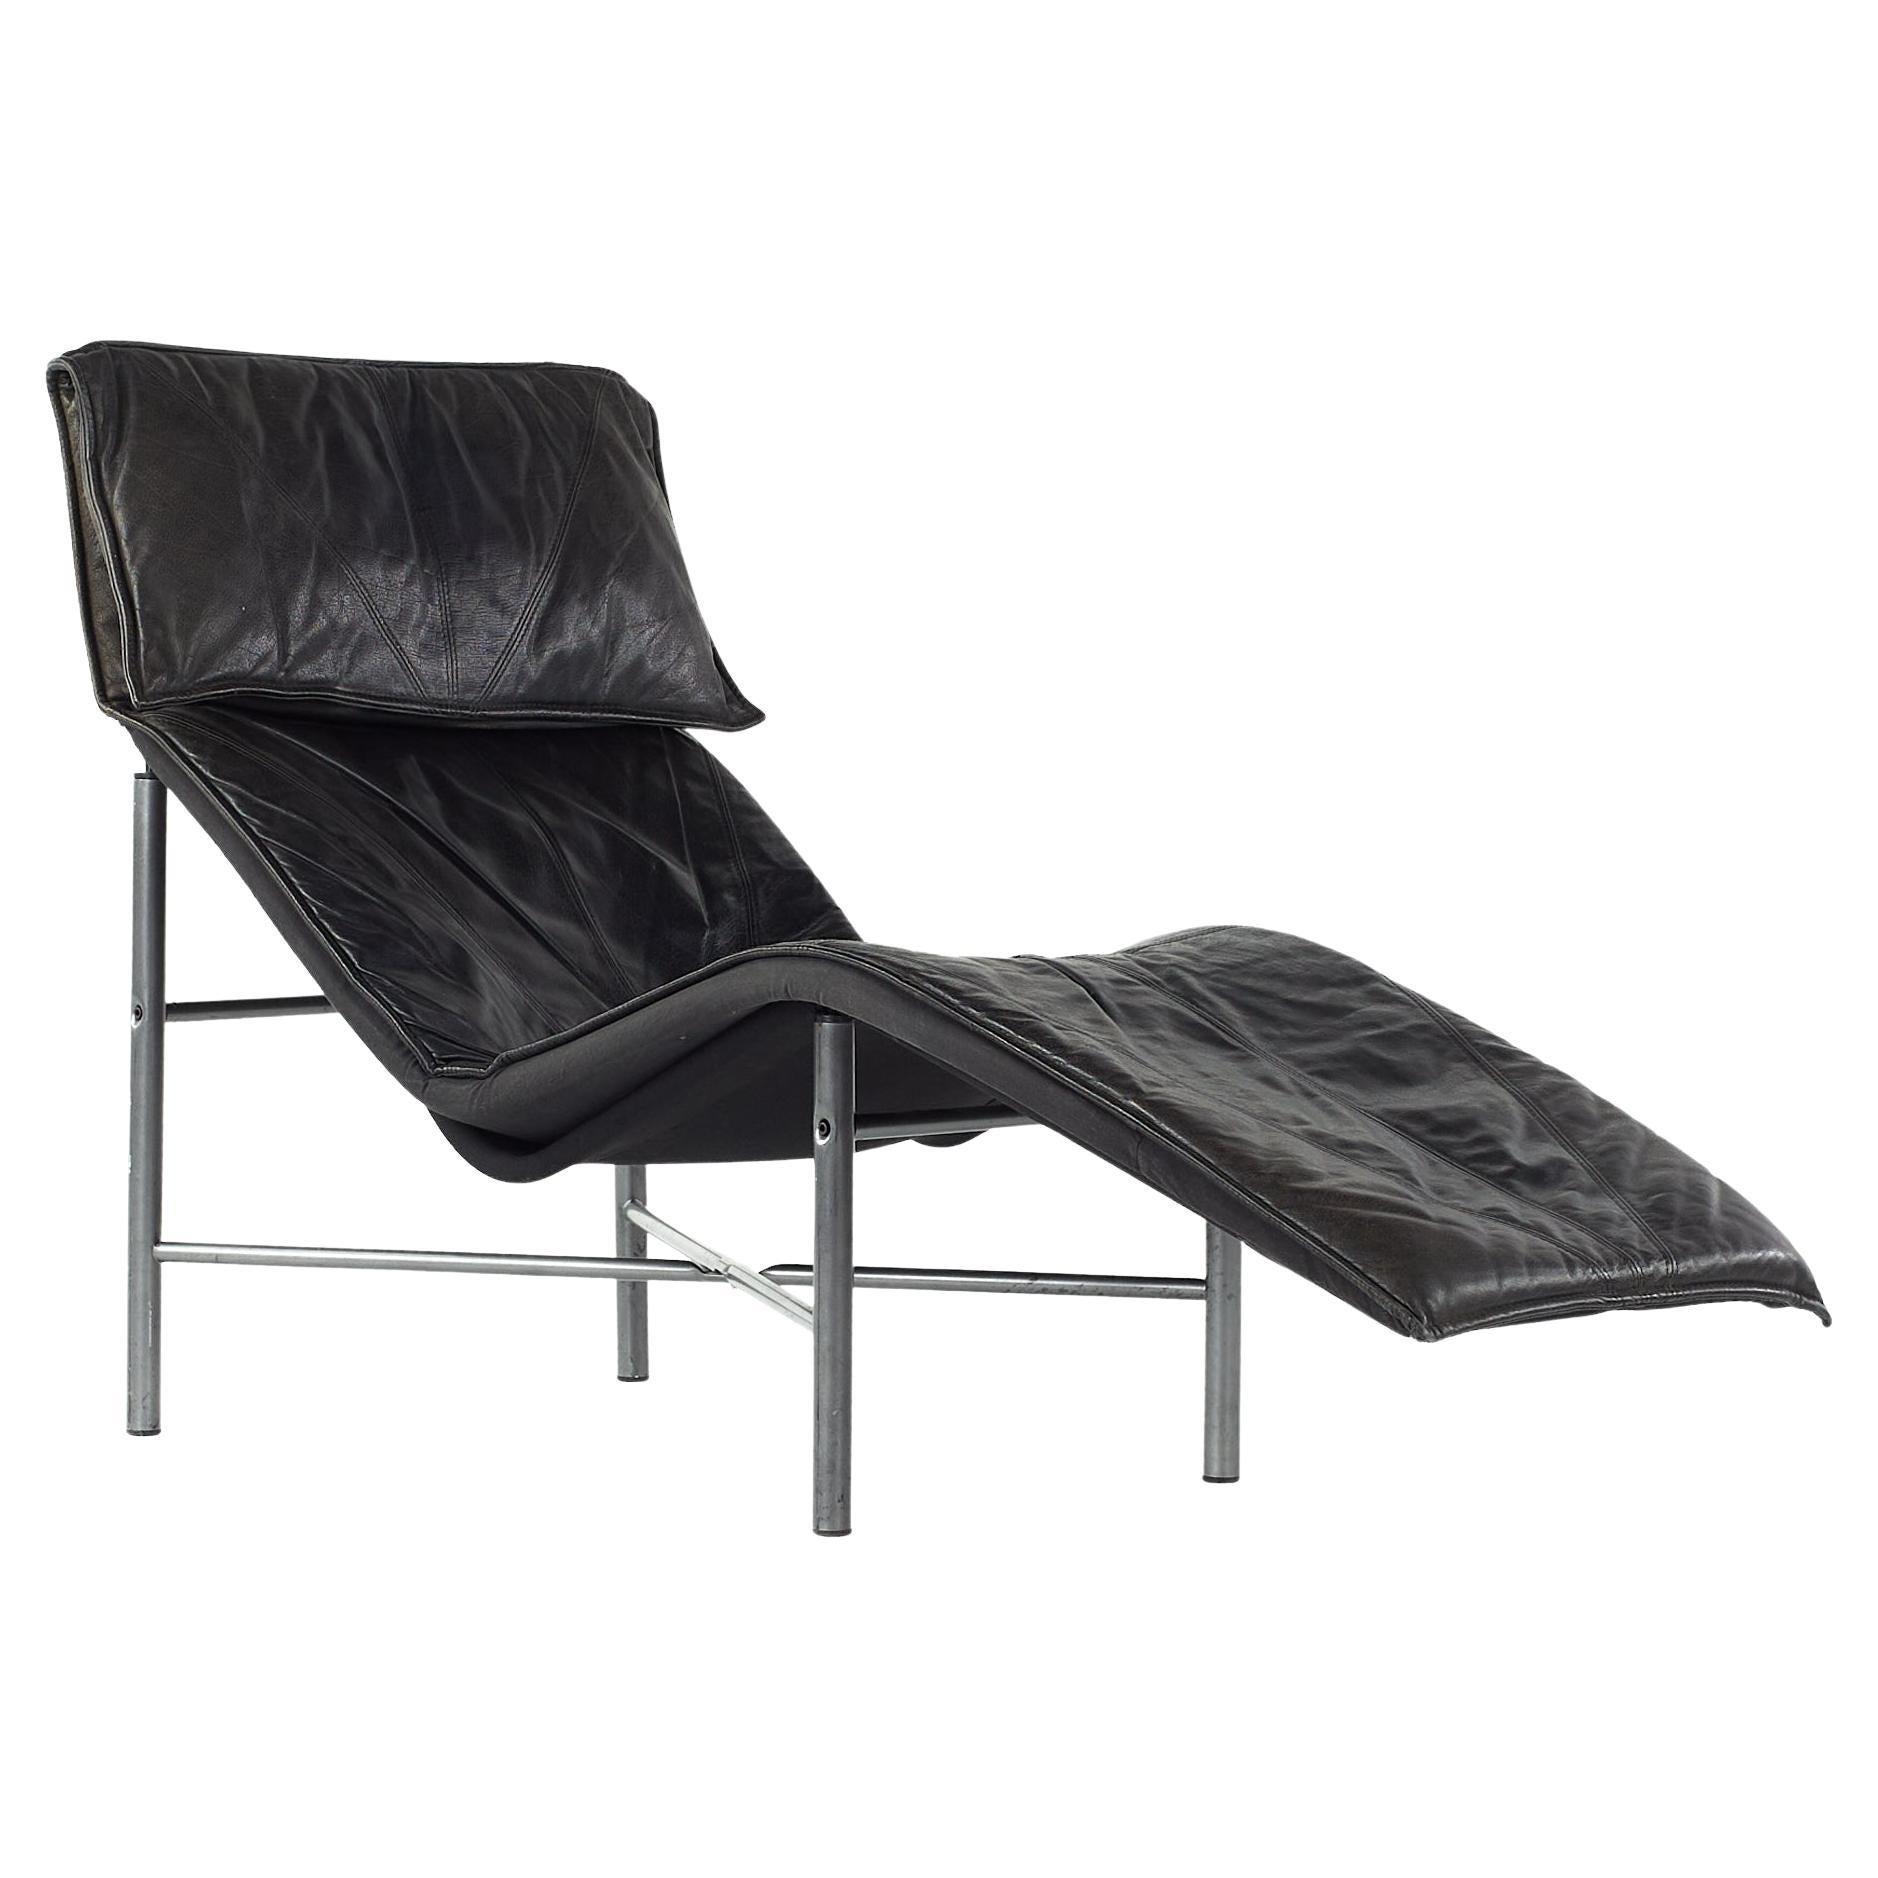 Early Tord Bjorklund for Ikea Midcentury Chaise Leather Lounge Chair For Sale